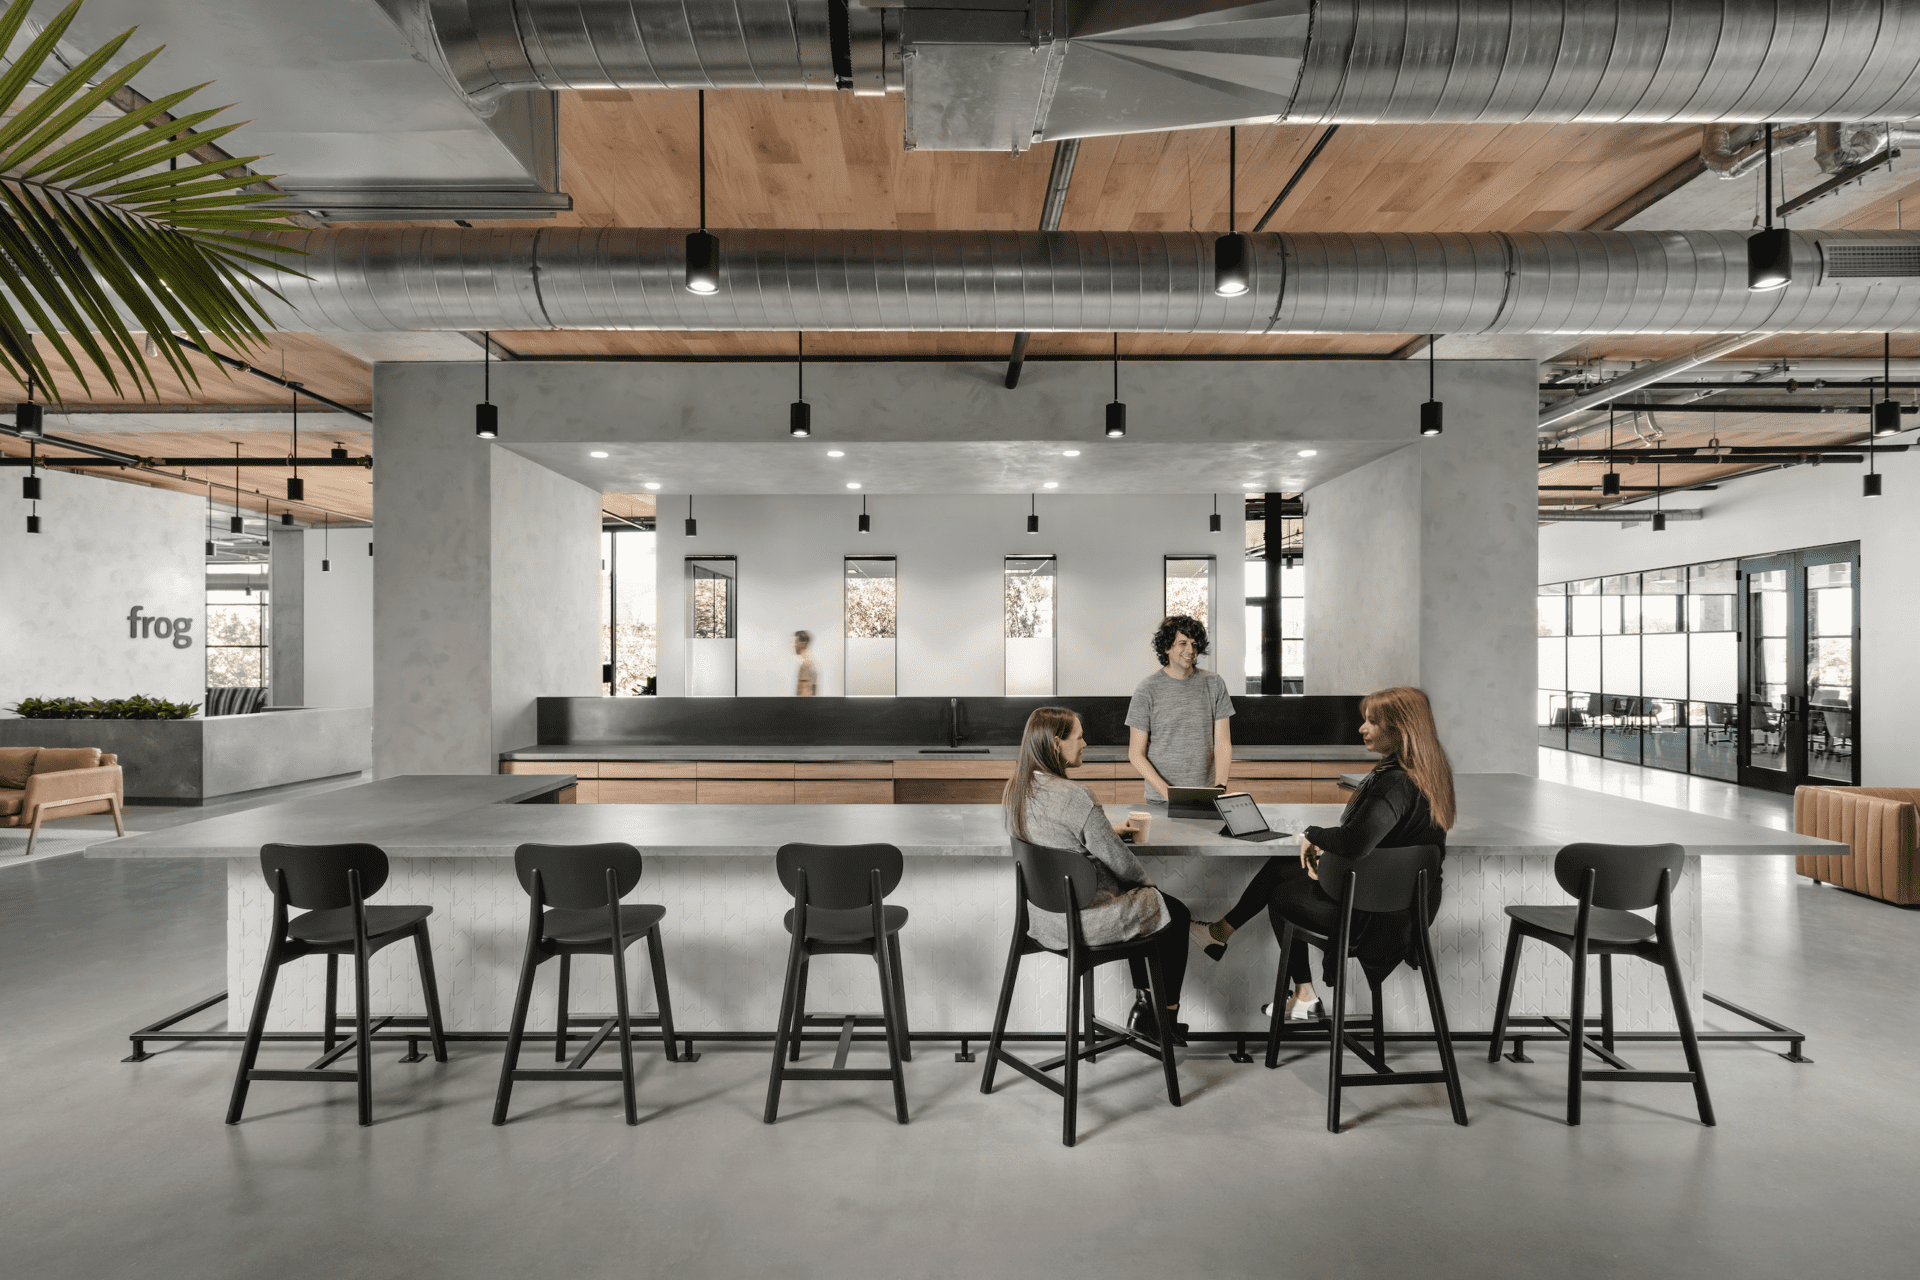 Perkins&Will, frog design, Austin, Texas, post-Covid office, workplace design, office design, industrial interiors OnOffice magazine